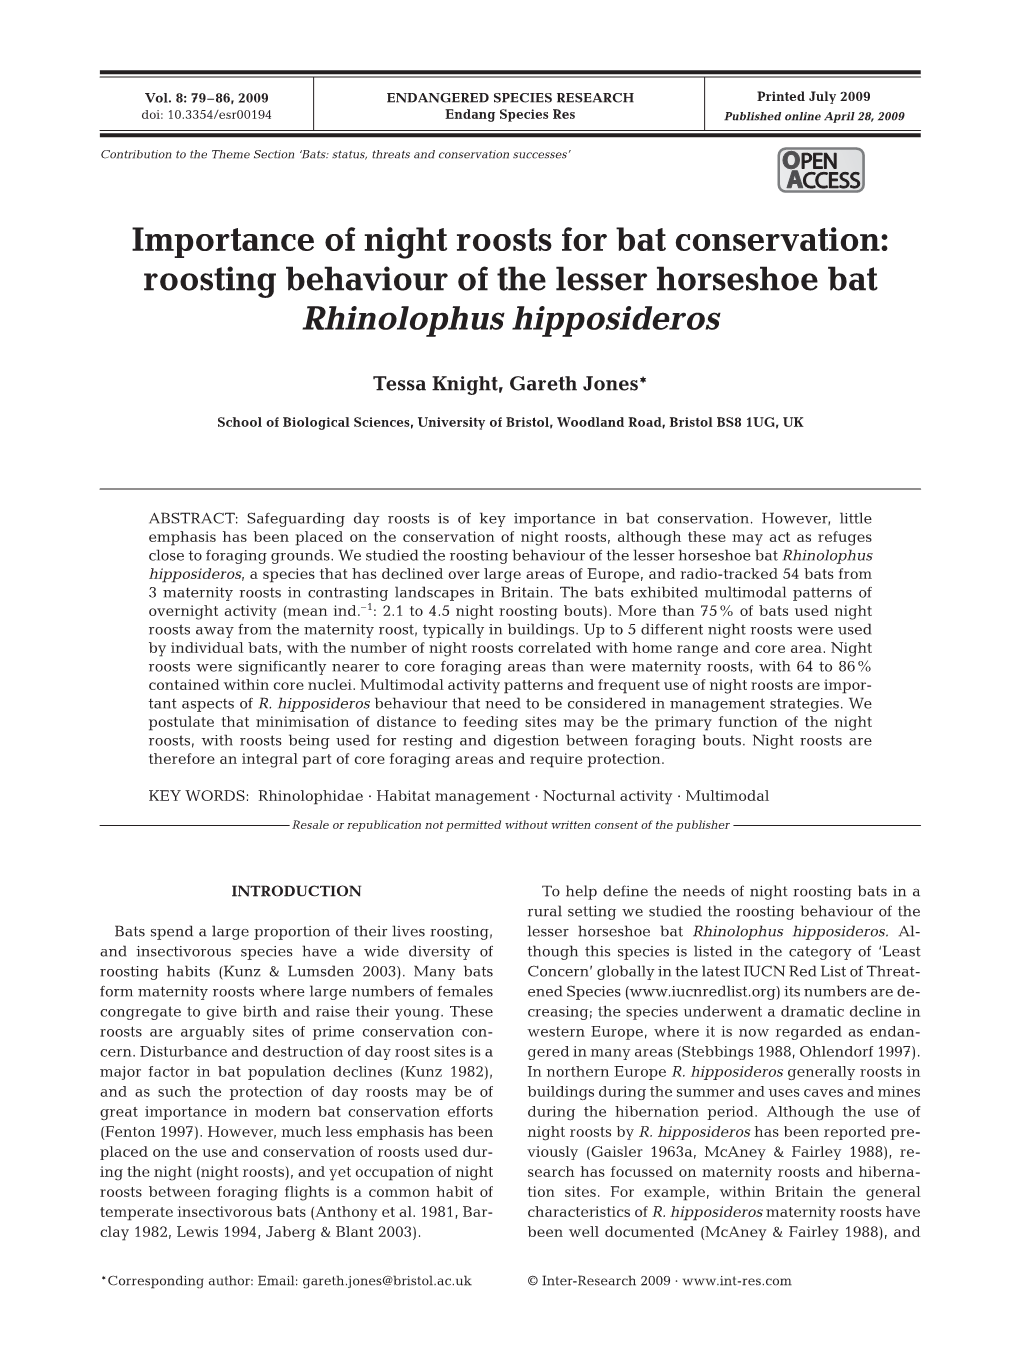 Importance of Night Roosts for Bat Conservation: Roosting Behaviour of the Lesser Horseshoe Bat Rhinolophus Hipposideros